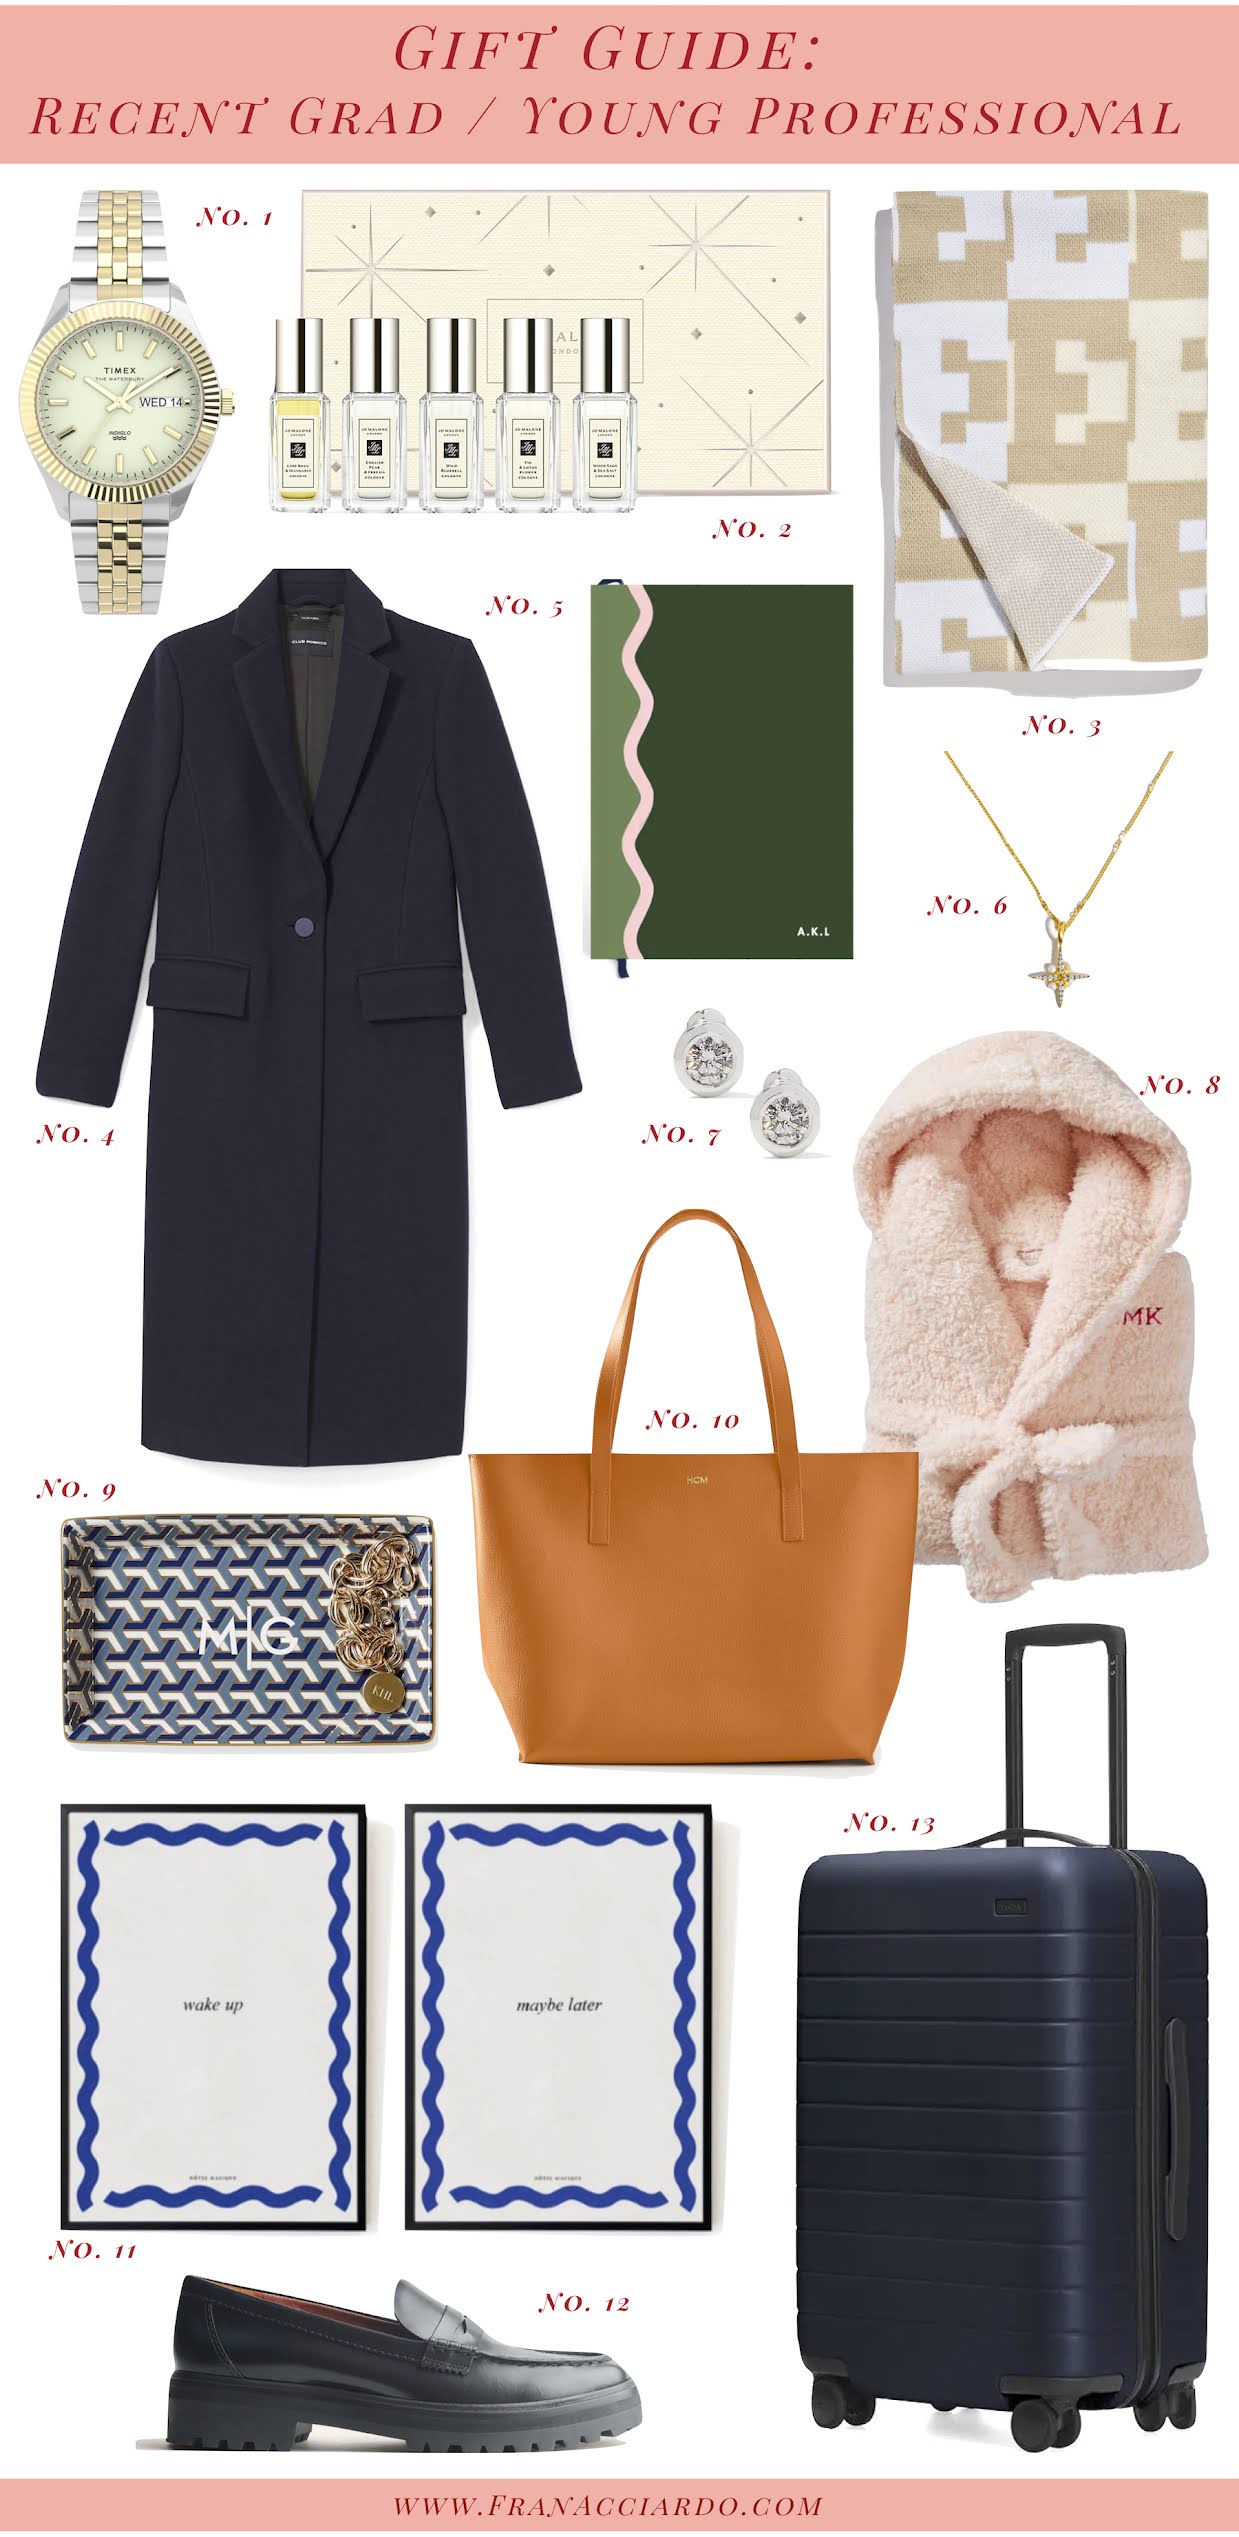 fran acciardo Gift Guide for the Recent Grad / gift ideas for the Young Professional